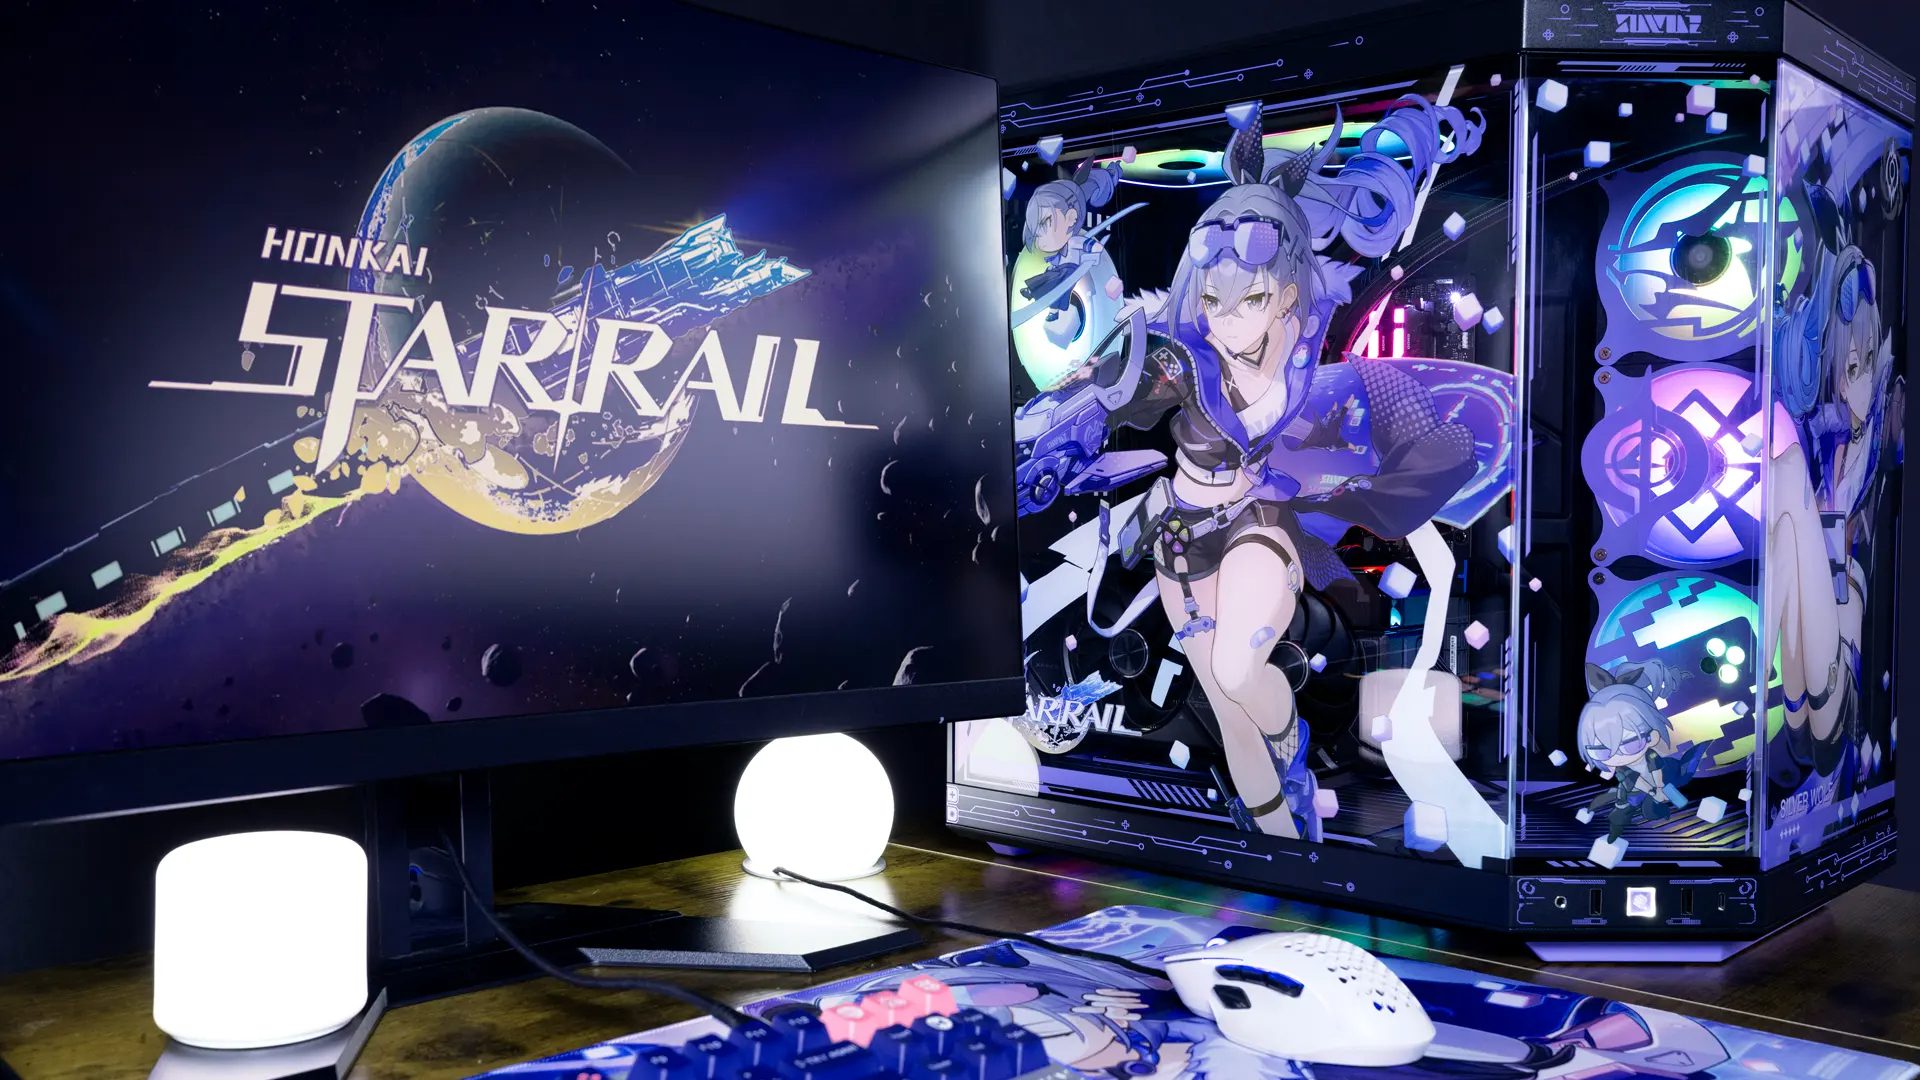 The latest Honkai collaboration: Star Rail brings us an adorable gaming PC inspired by our favorite intergalactic gamer